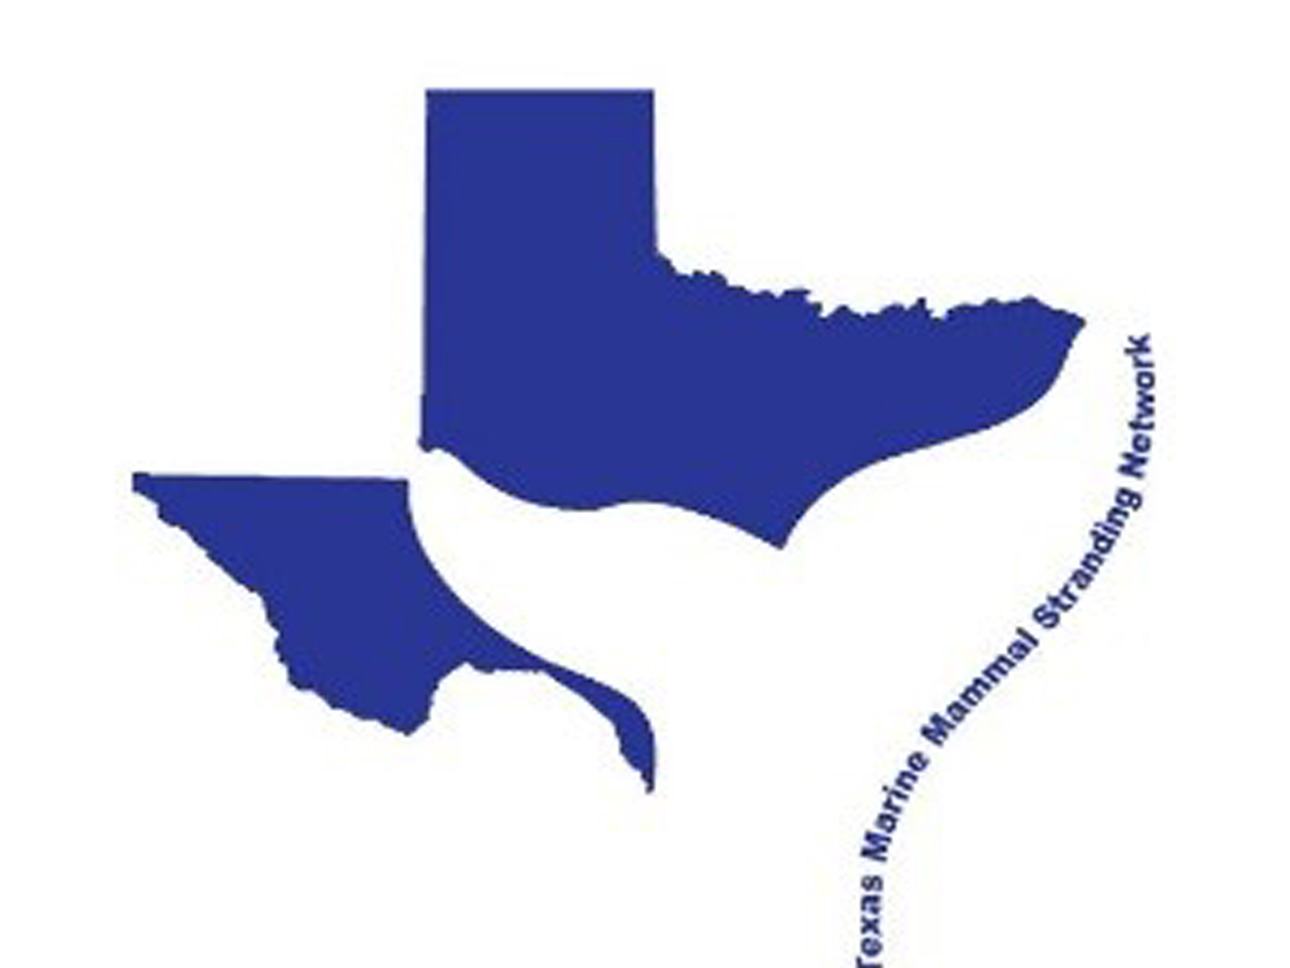 Blue Texas state map, with the left side covered by a white dolphin tale